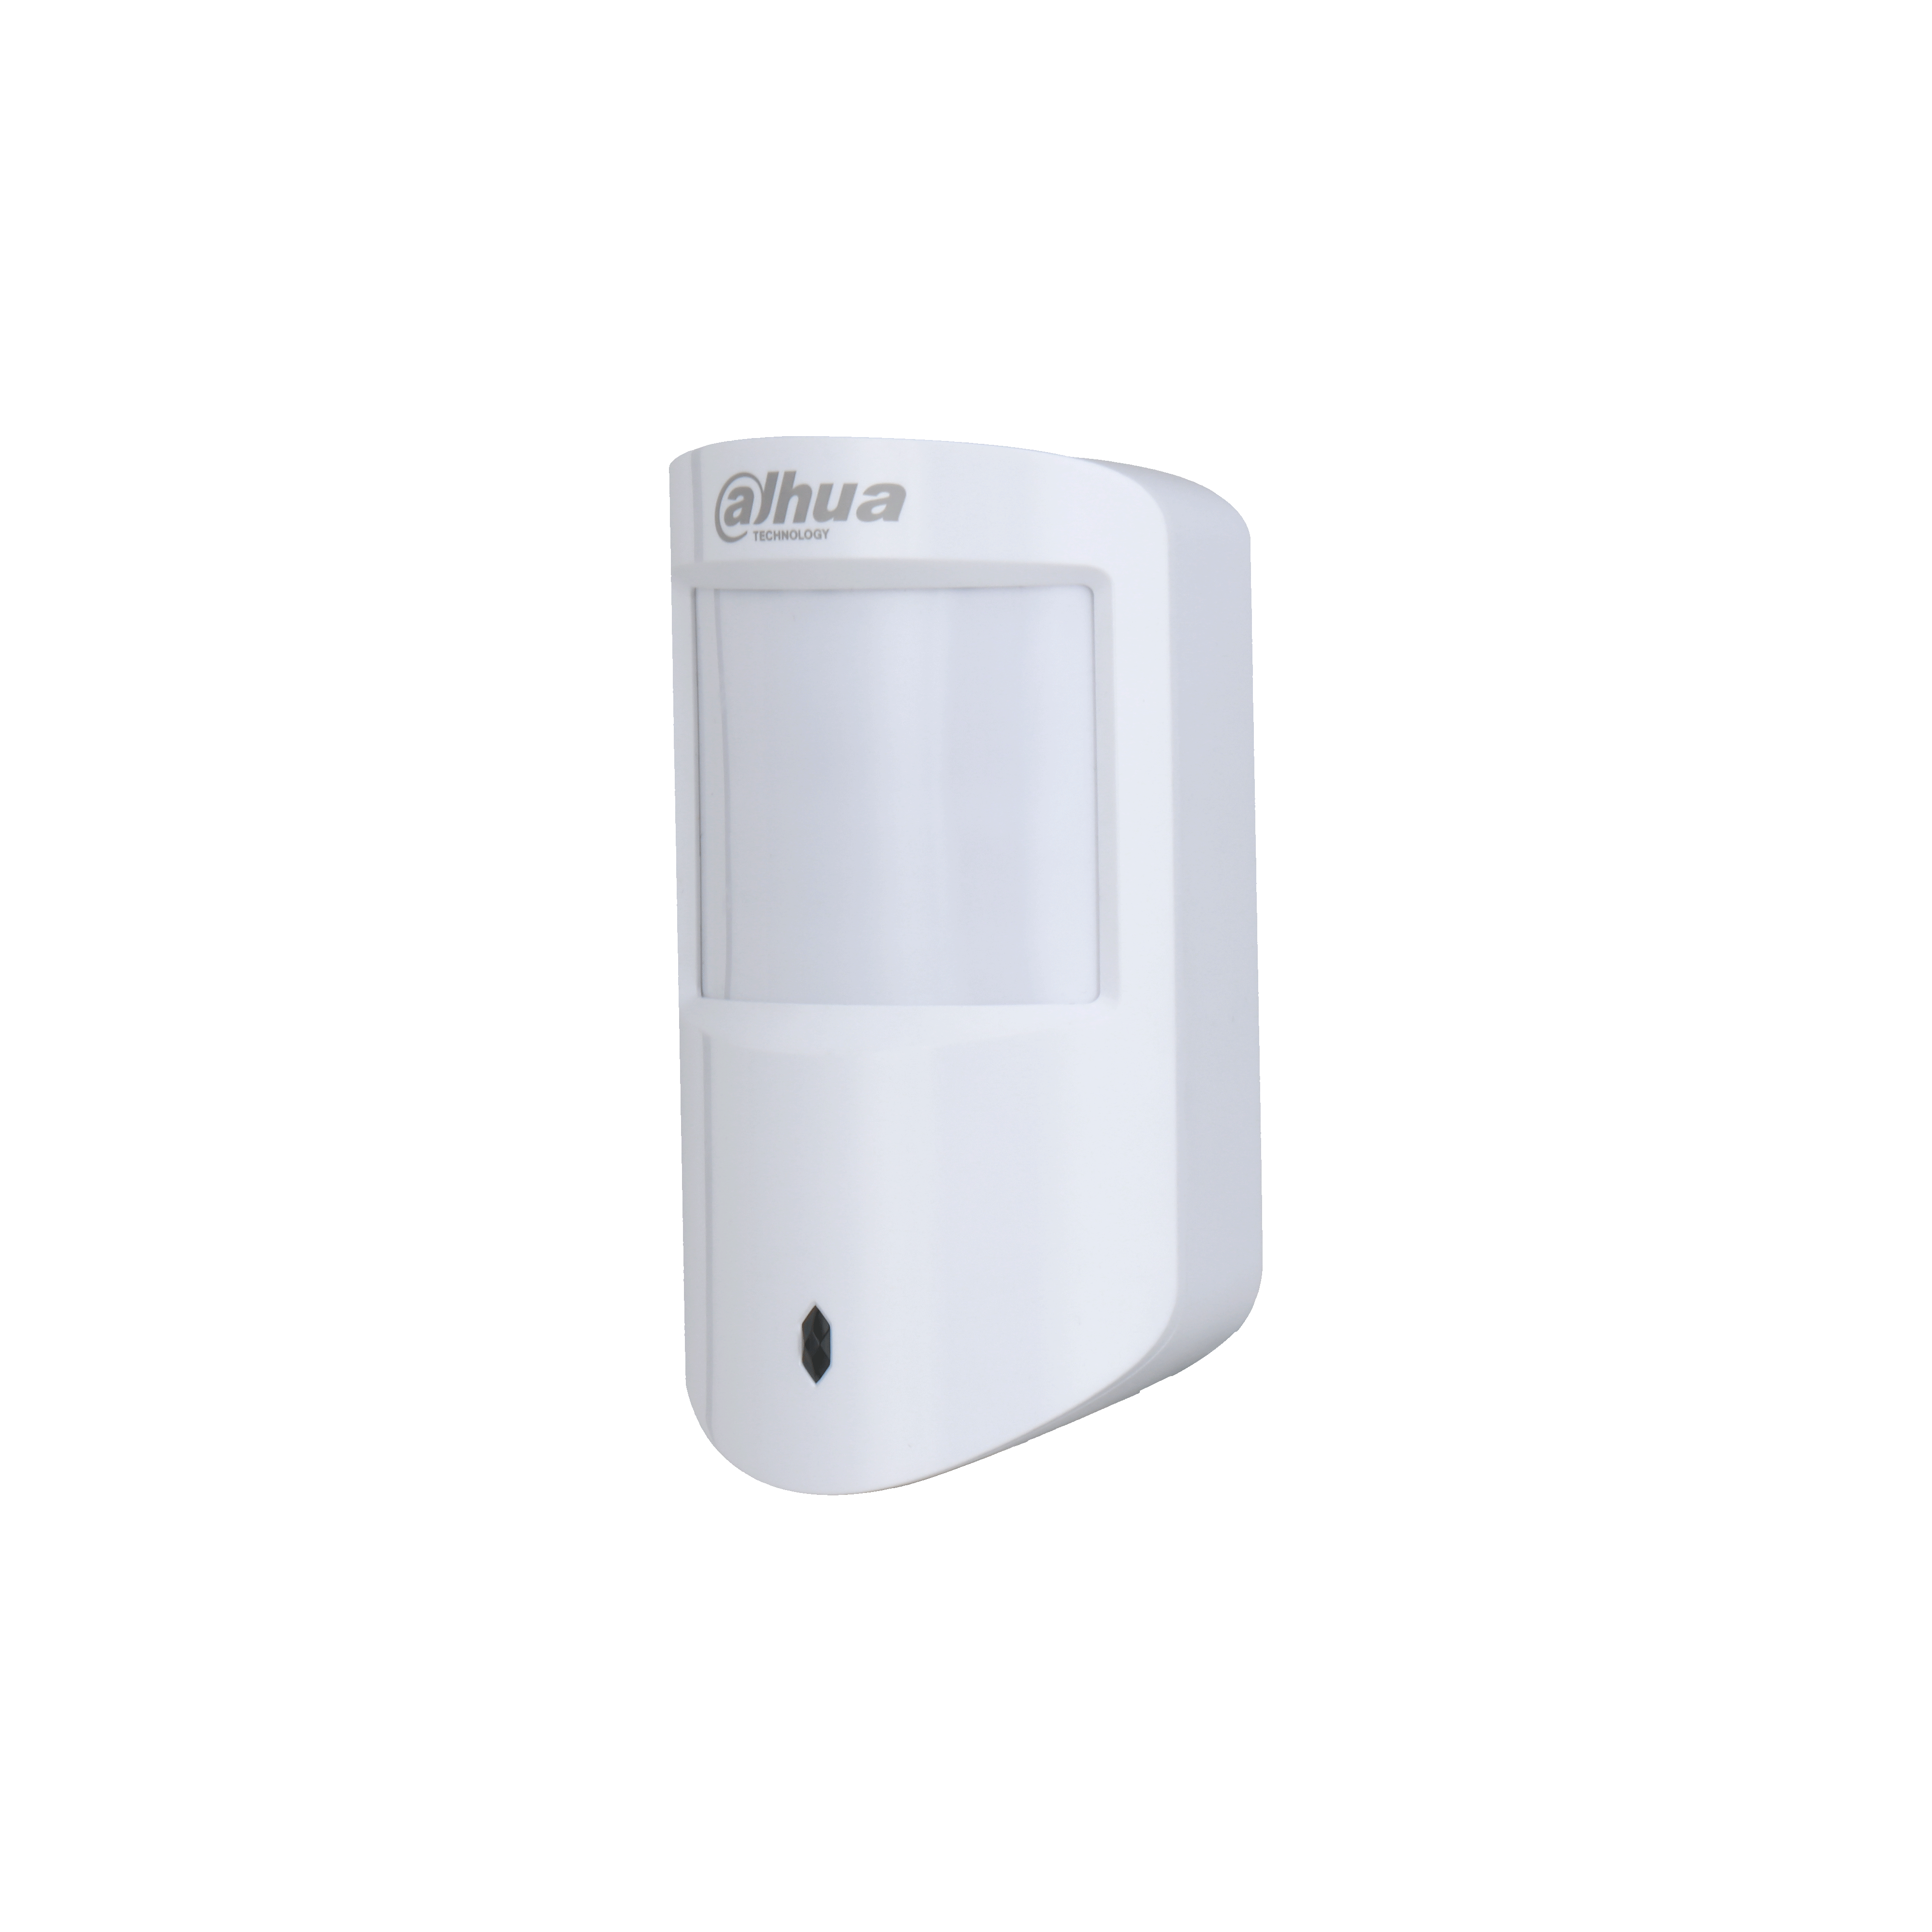 DAHUA WIRELESS PIR WHITE PET UP TO 18KG 12M DETECTION AREA WALL MOUNT 2.2M MOUNT HEIGHT 433MHz 1xCR123A BATT (3.3V)